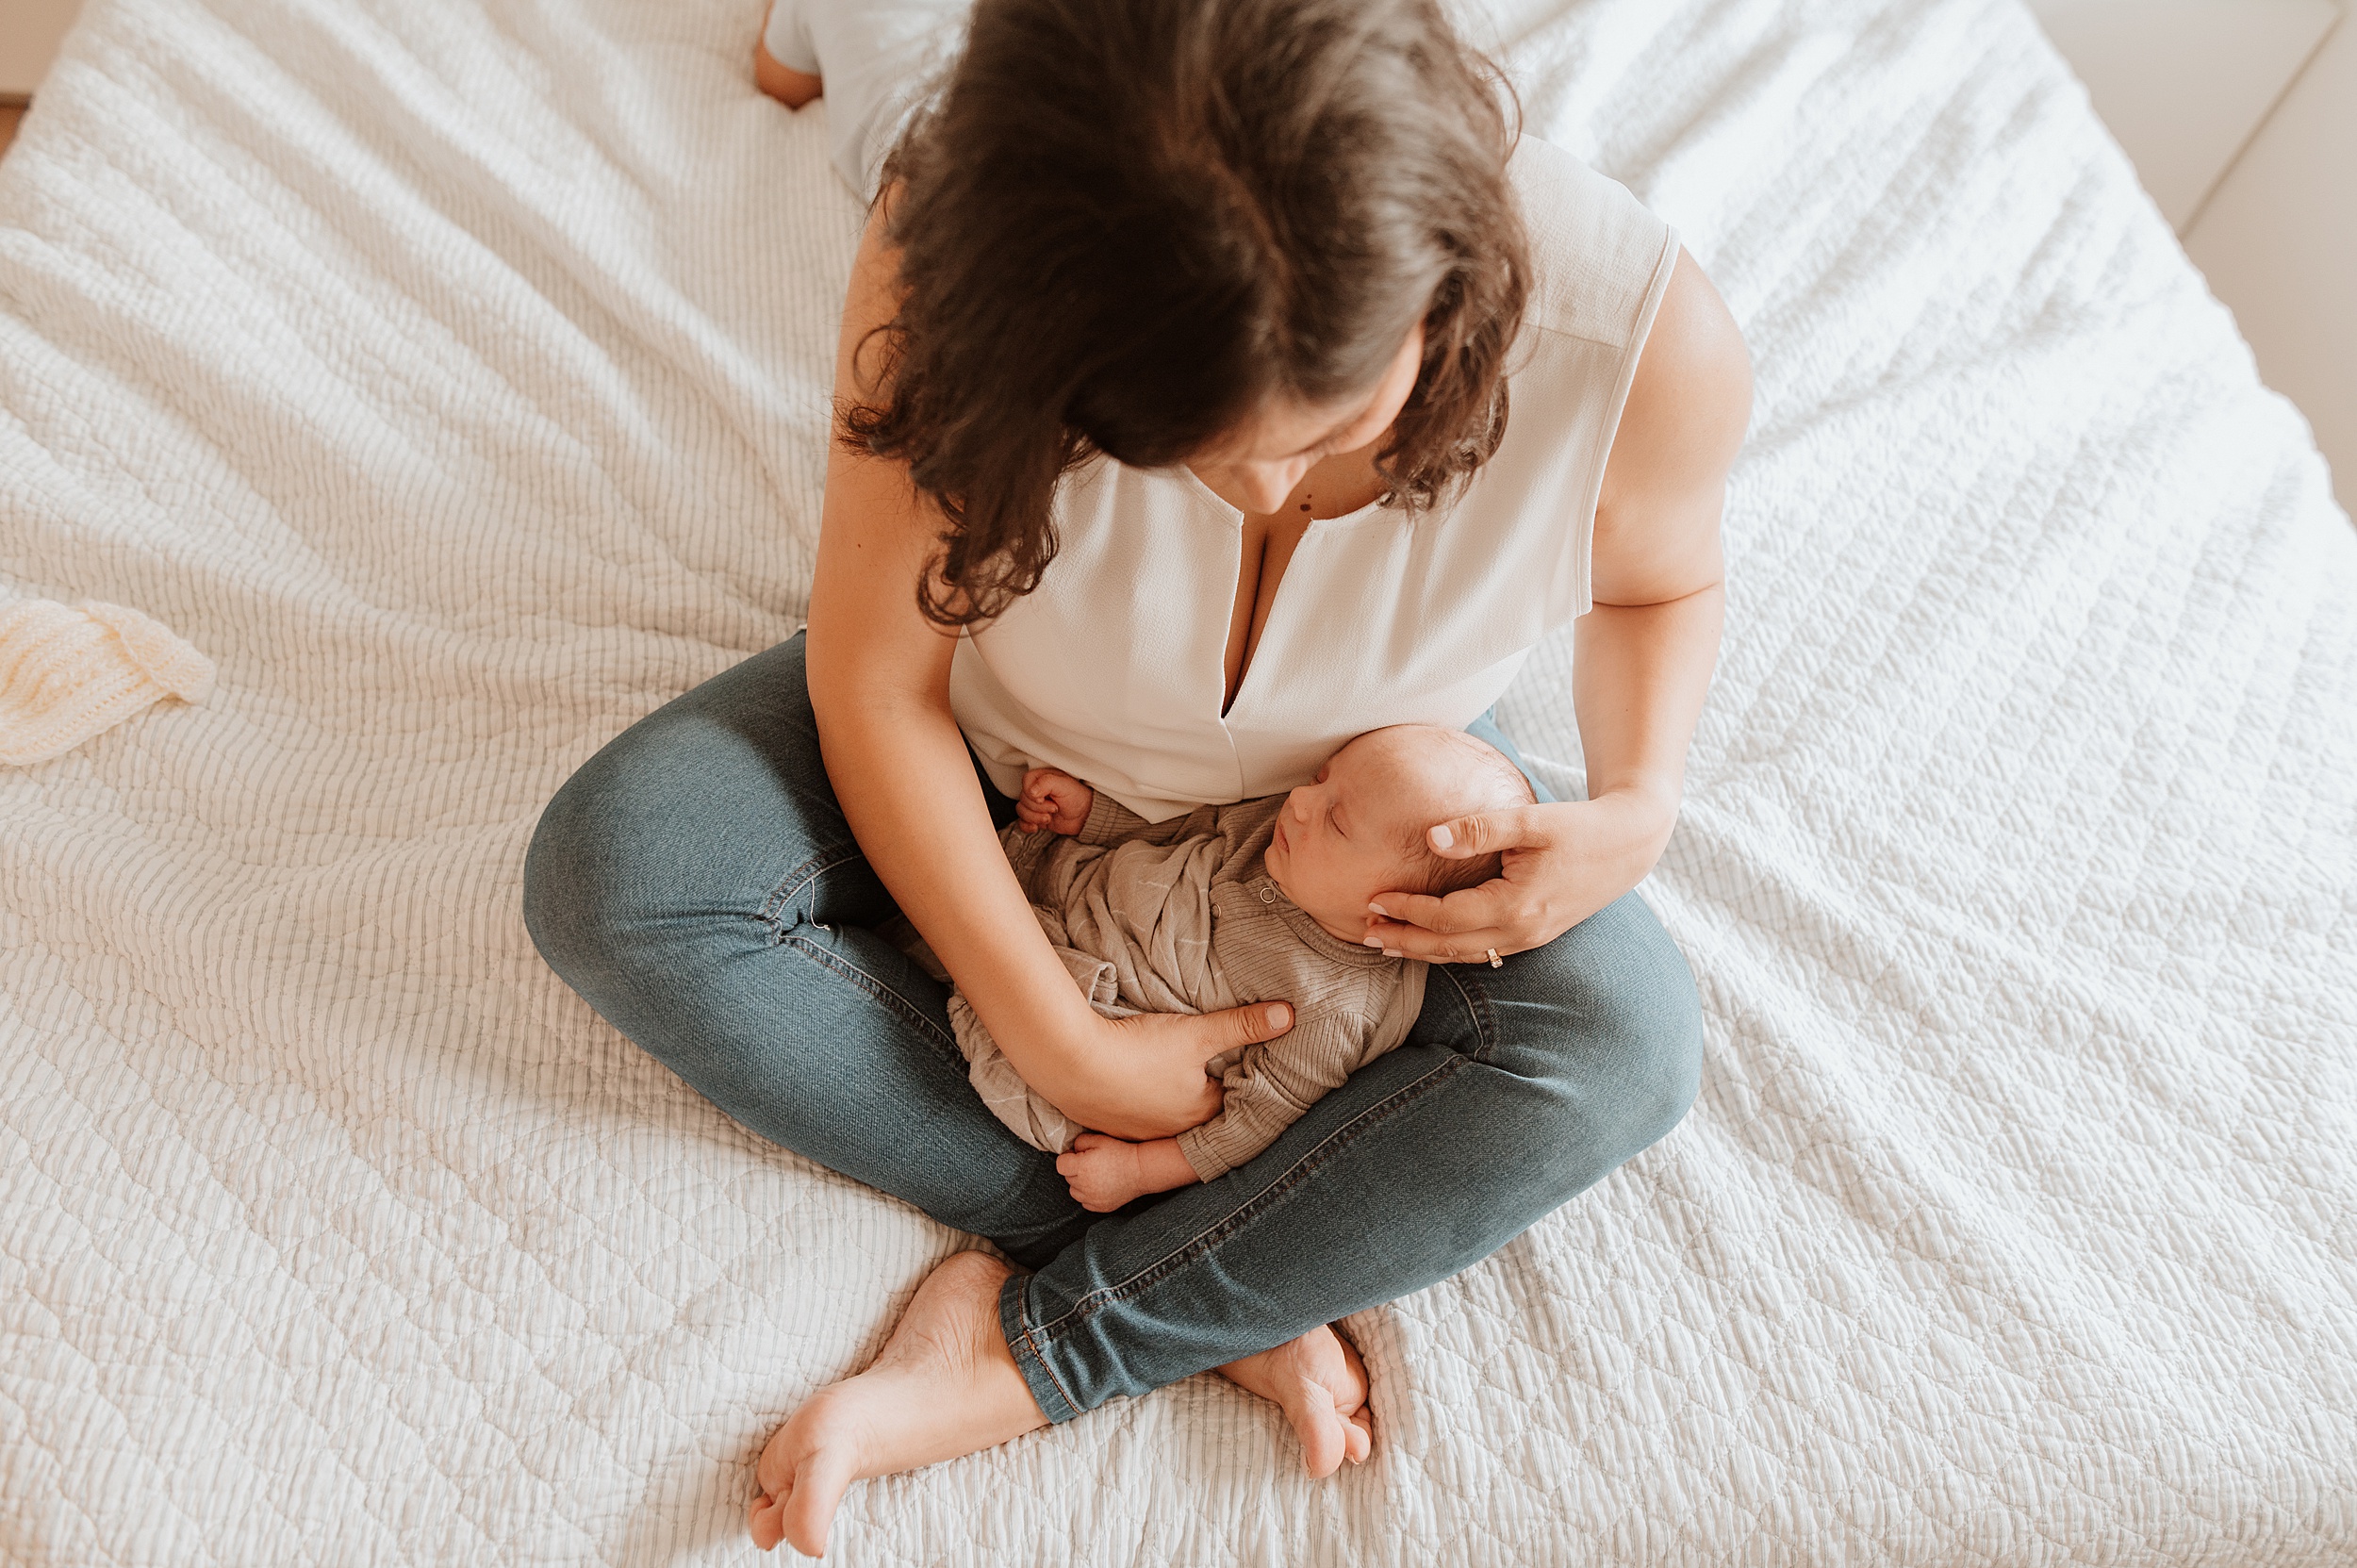 A new mother in jeans and white top cradles her sleeping newborn in her lap while sitting on a bed after visiting north vancouver pediatricians